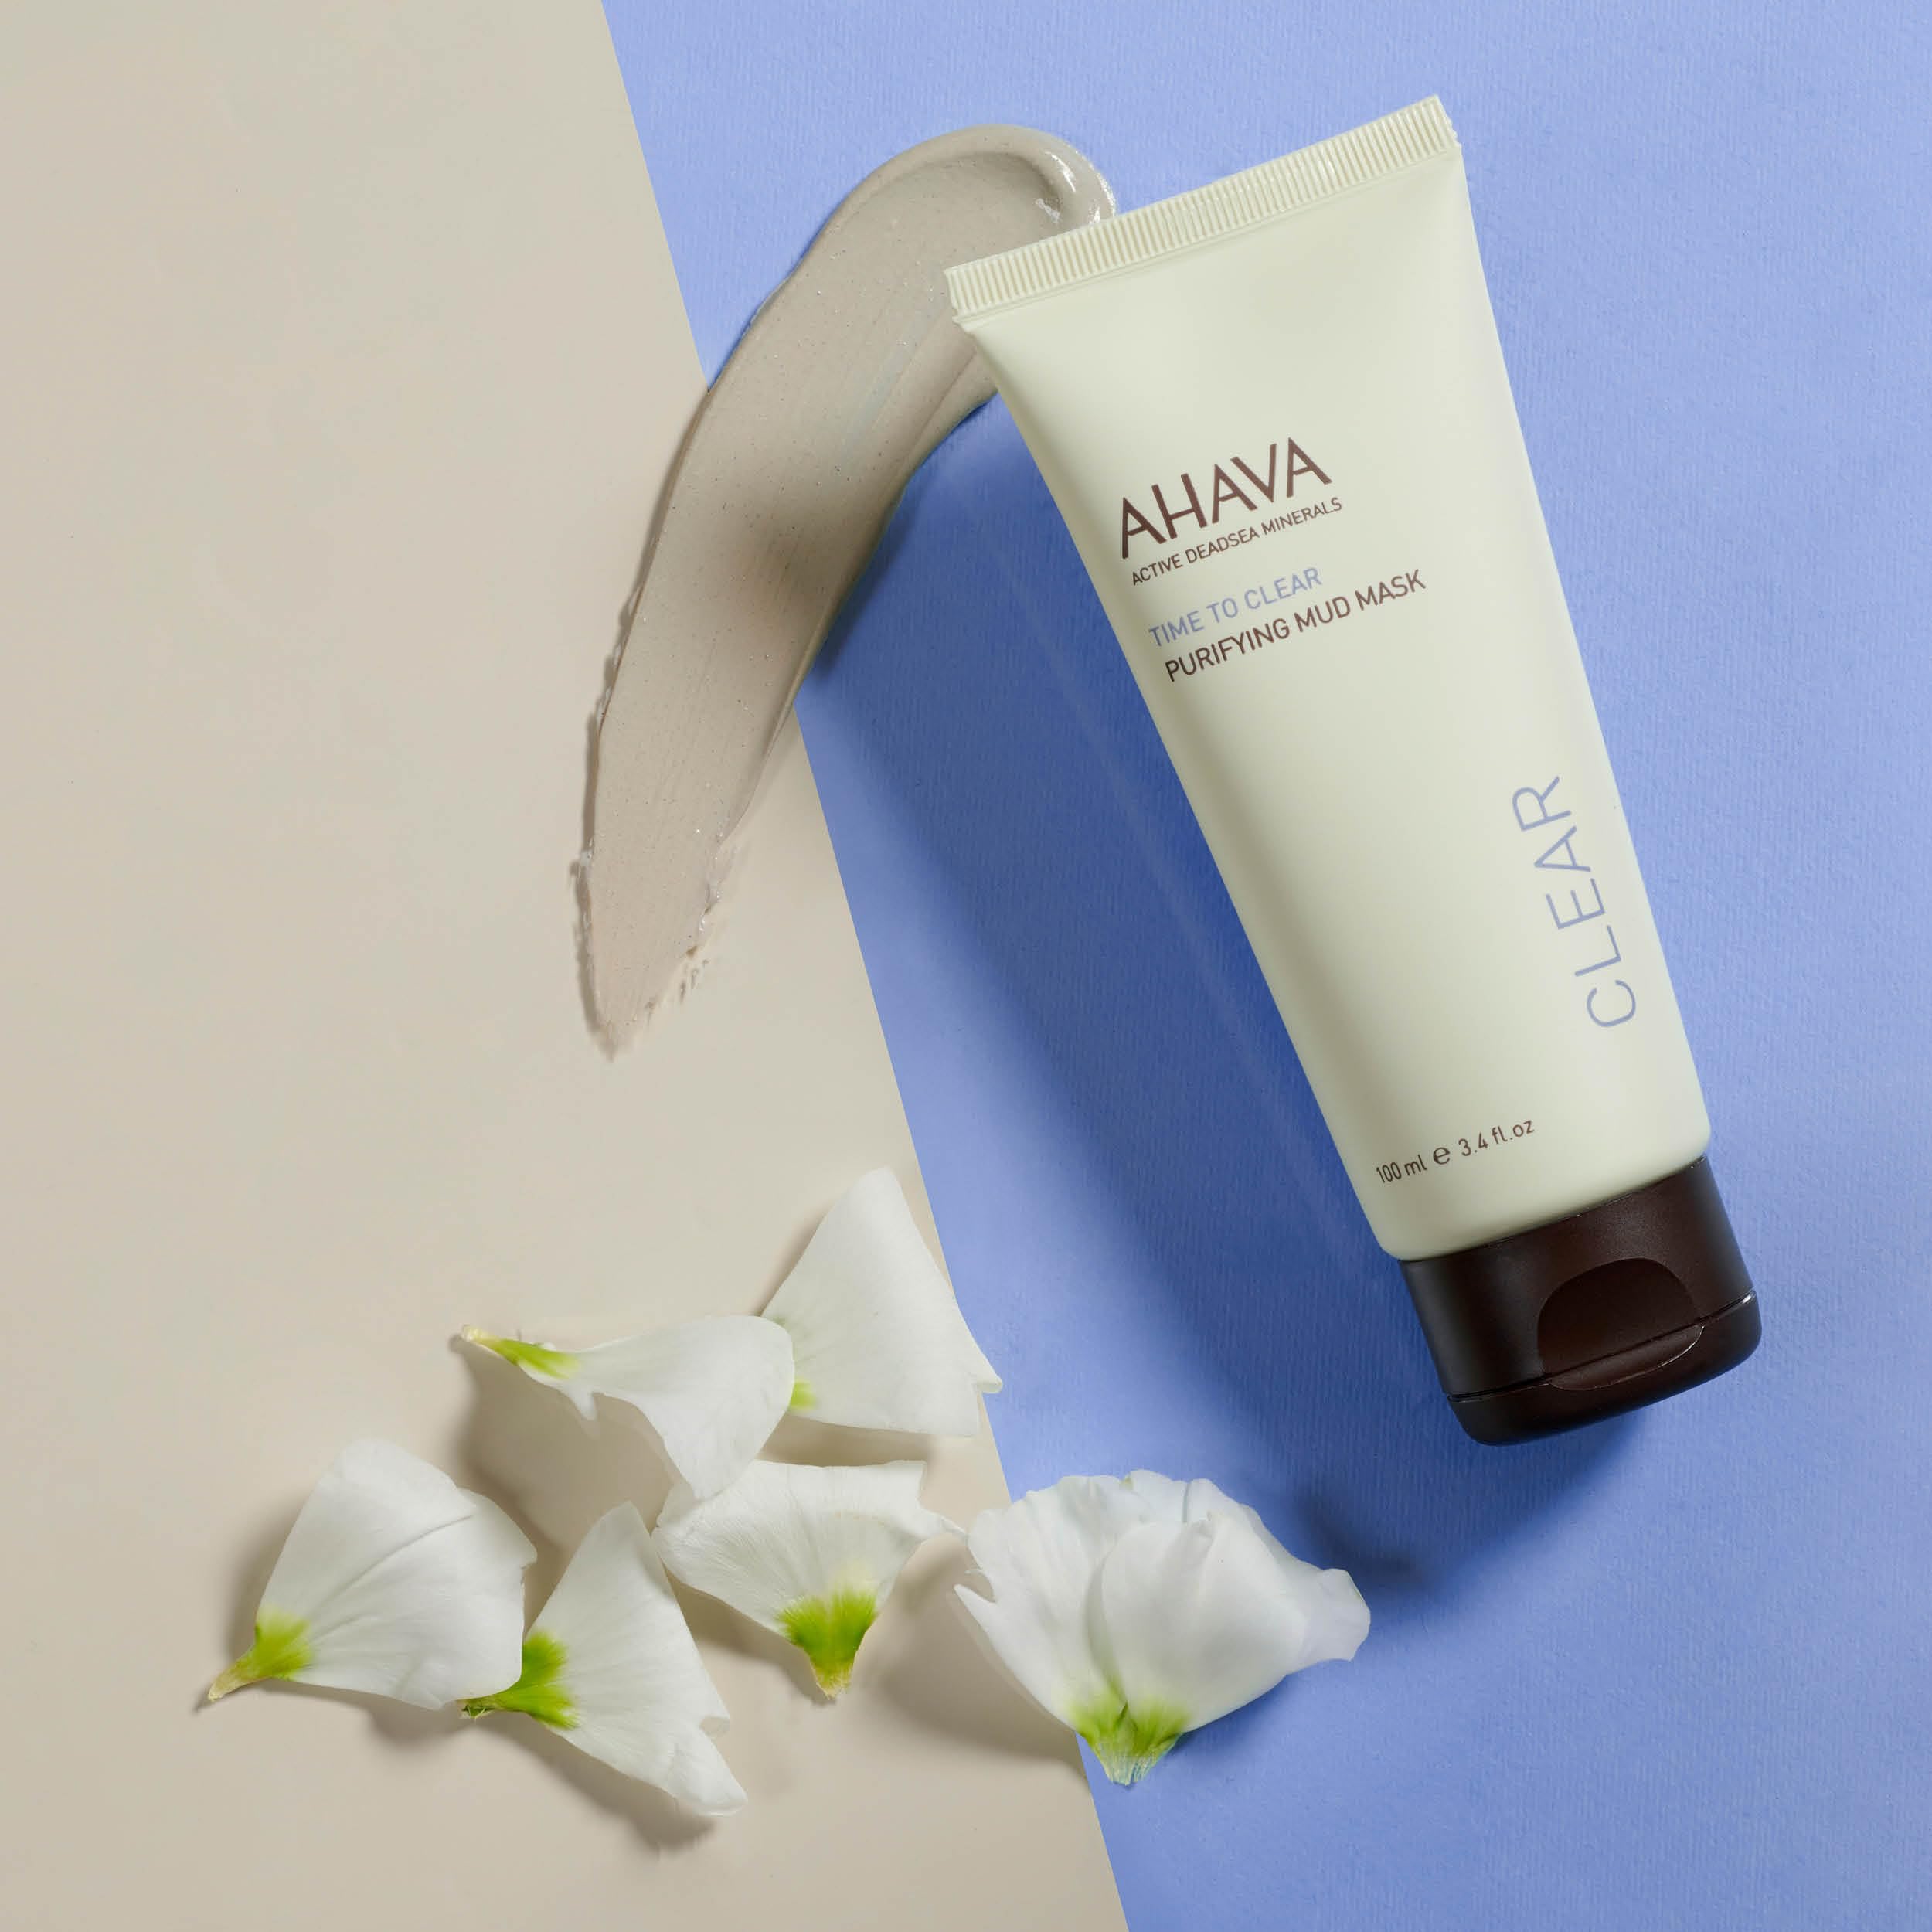 AHAVA Purifying Mud Mask - Indulging Mud Mask Cleaning & Purifying the Skin, Soothes, Softens & Clarifies, Enriched with Exclusive Osmoter, Dead Sea Mud, Aloe Vera, Vitamin B5 & Jojoba Oil, 3.4 Fl.Oz